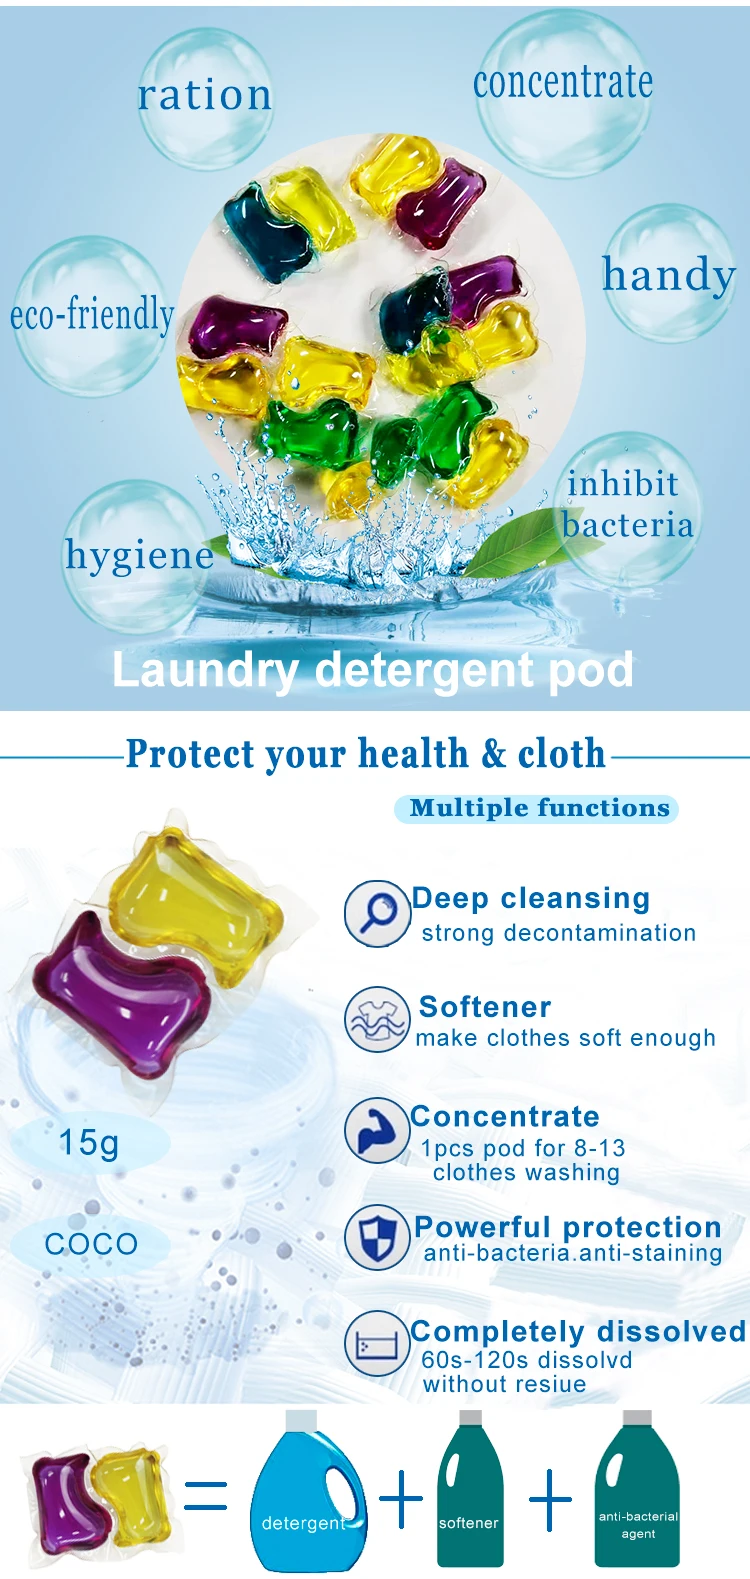 15g oem clothing washing apparel detergent pods laundry pods detergent capsules/fabric softener